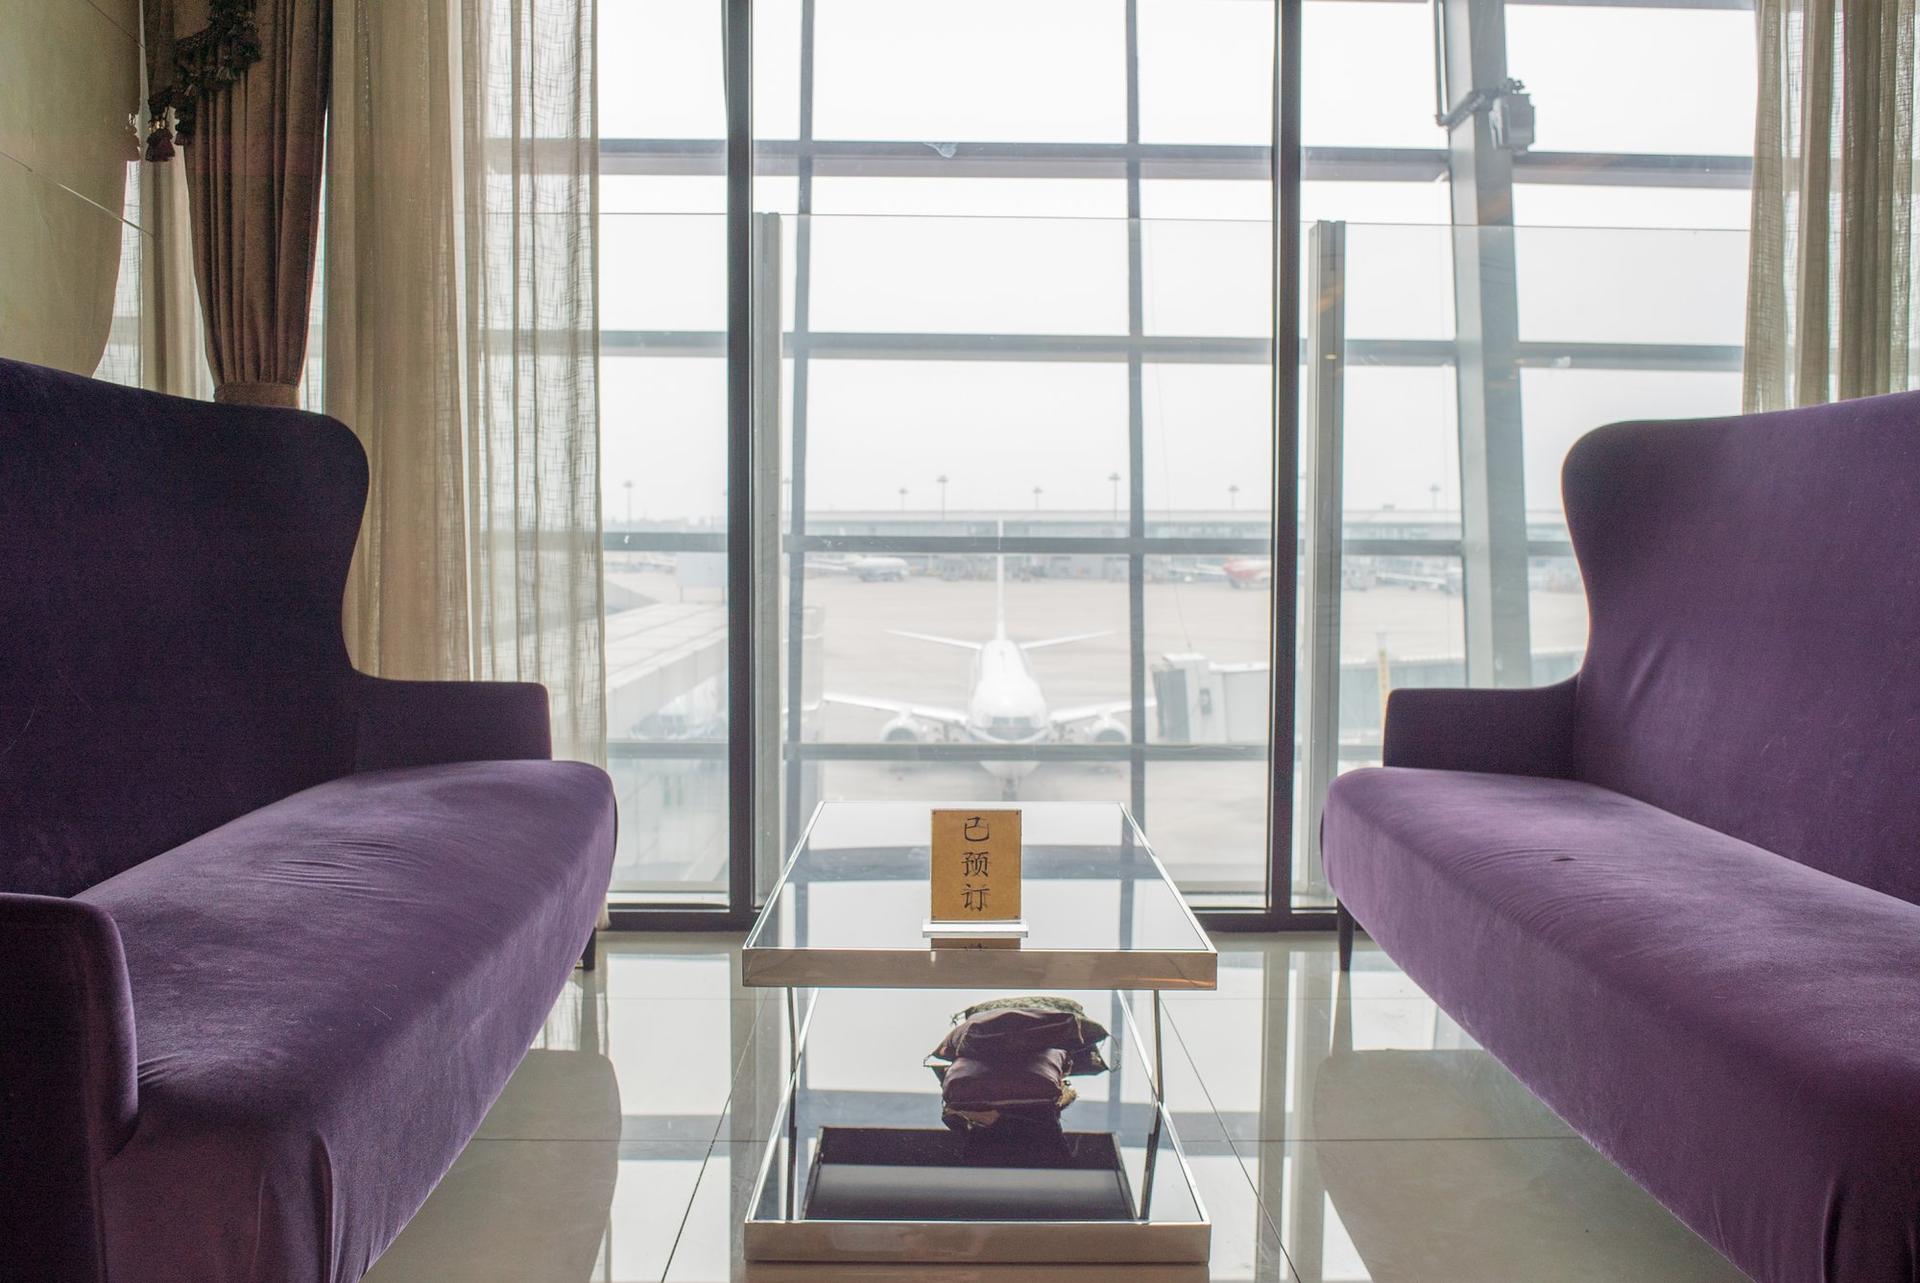 Tianjin Airlines Lounge image 3 of 13